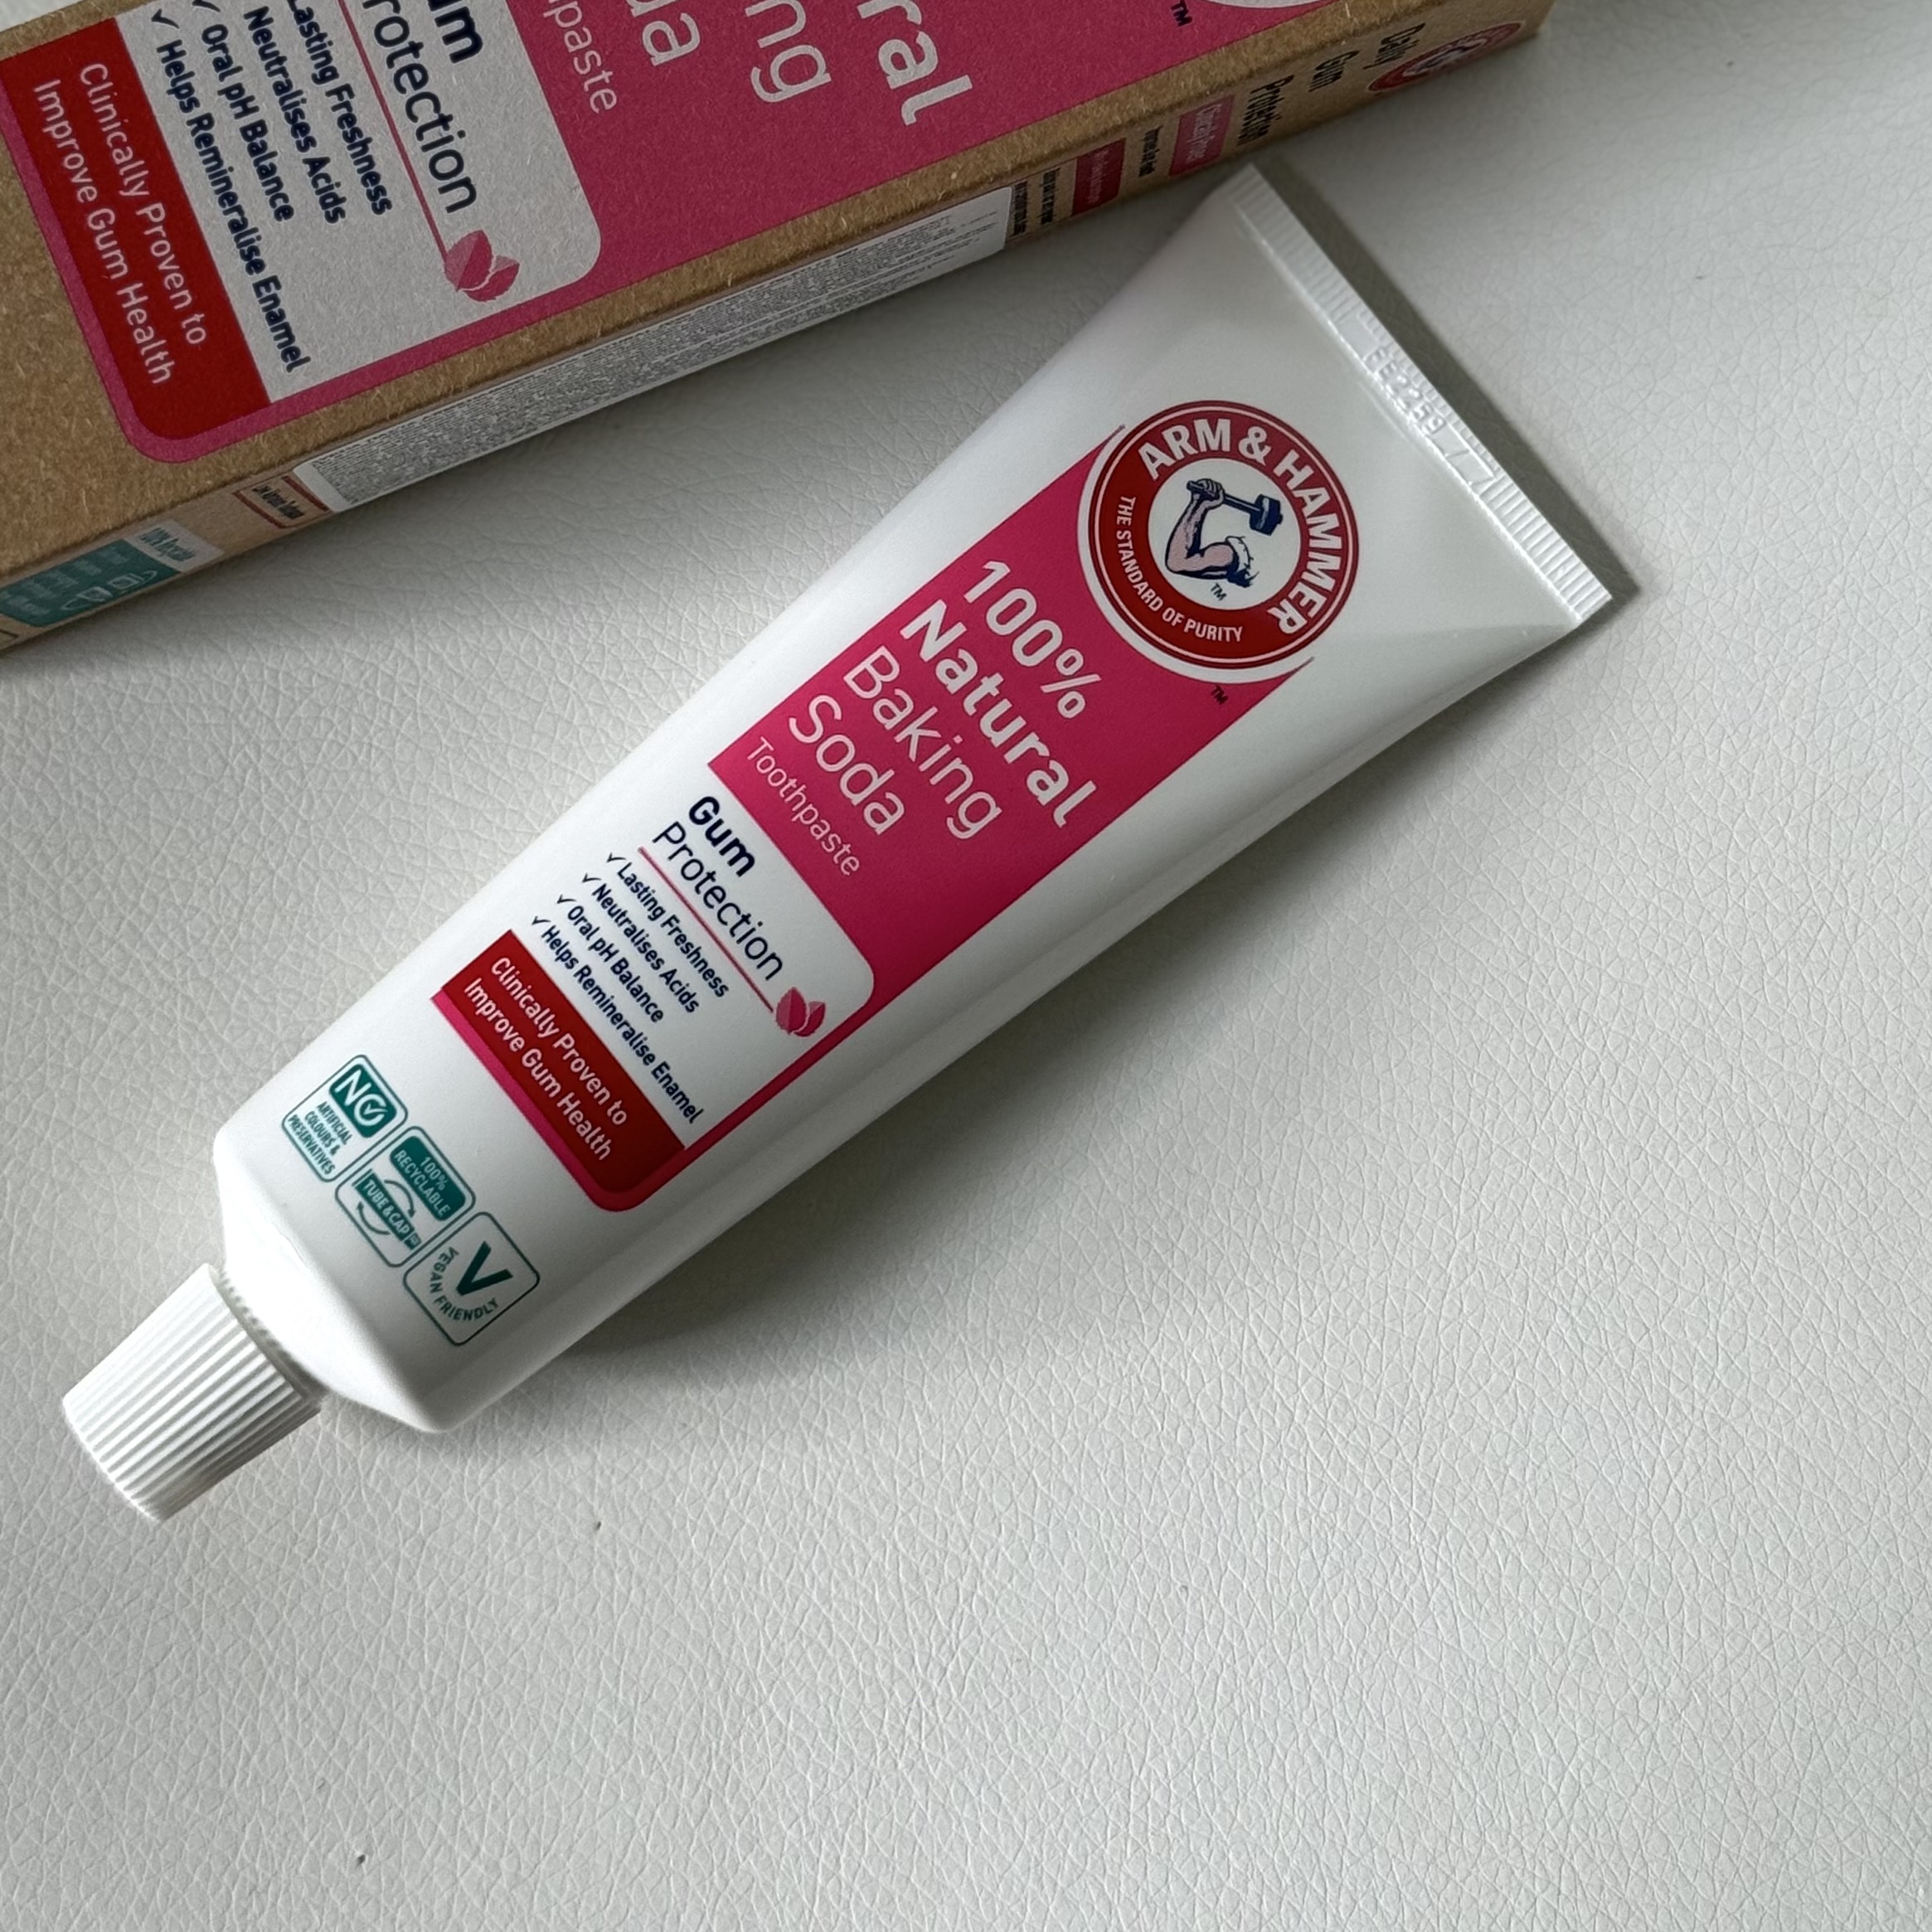 Arm & Hammer 100% Natural Baking Soda Gum Protection Toothpaste